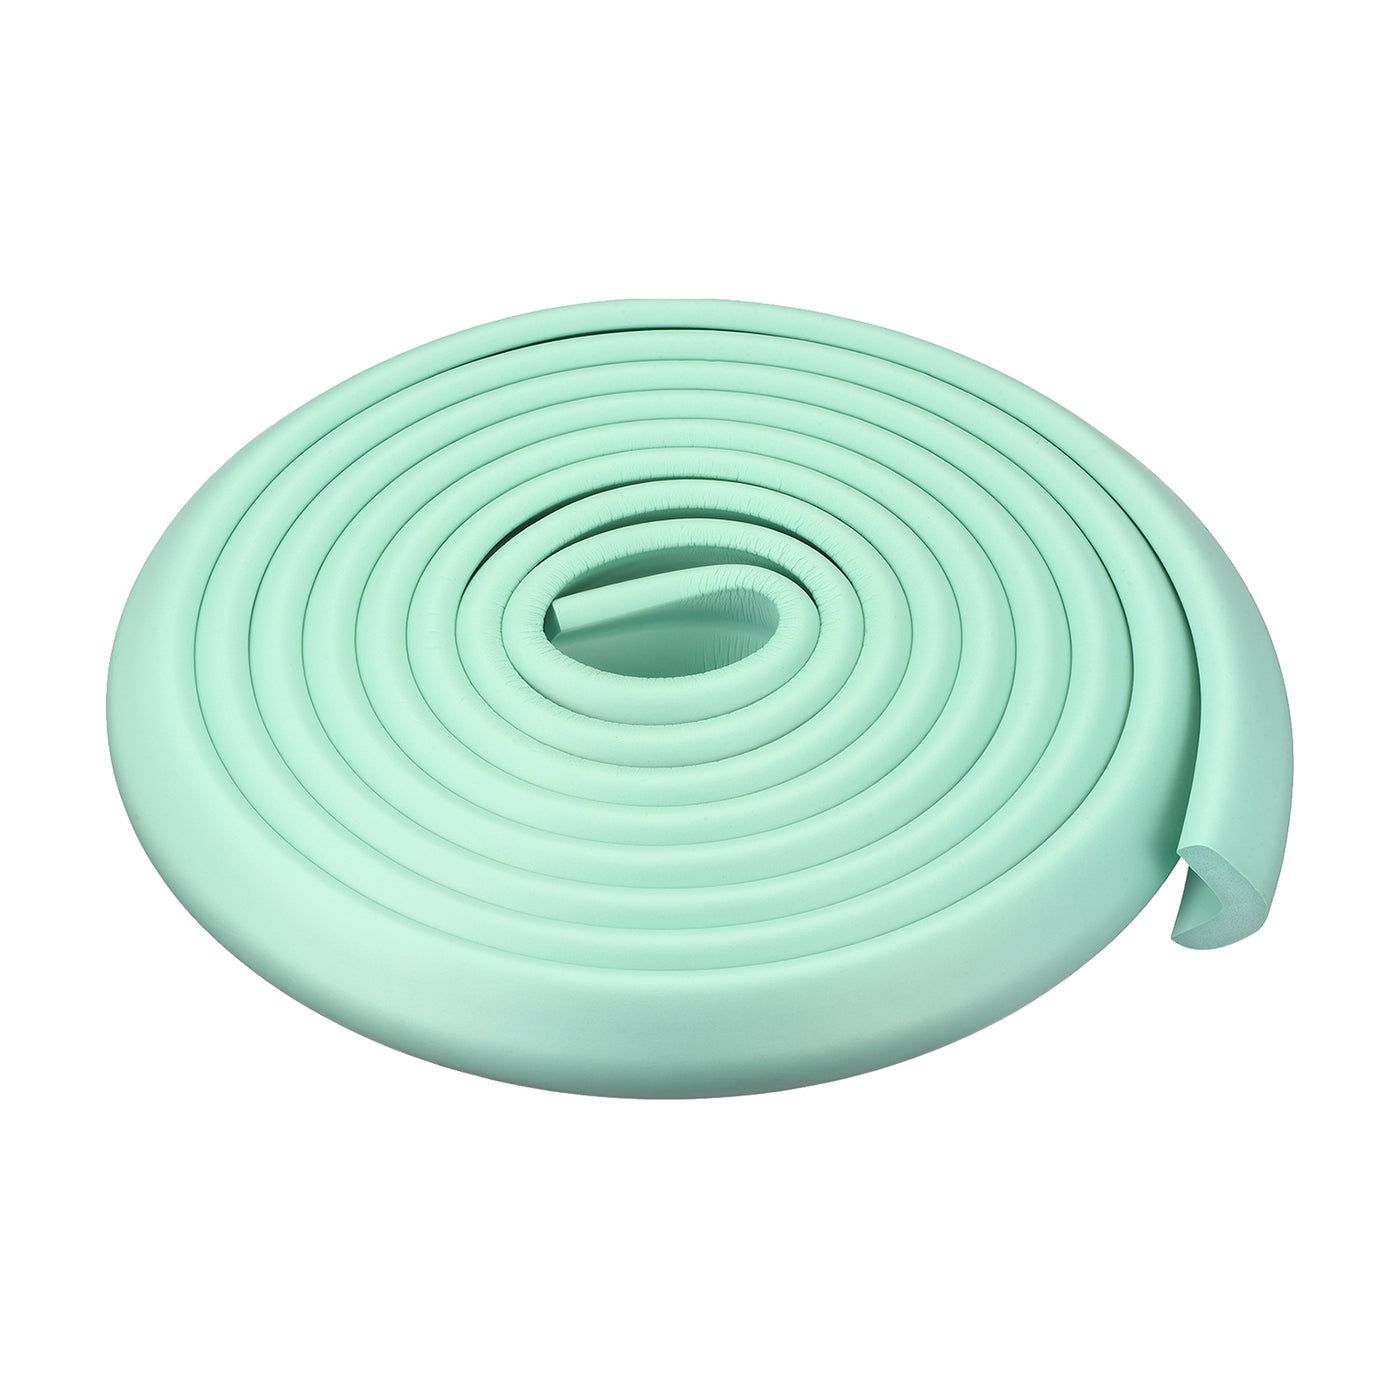 uxcell Uxcell Corner Guards Edge Protectors 6.56ft(2M), Foam Safety Bumper Light Green